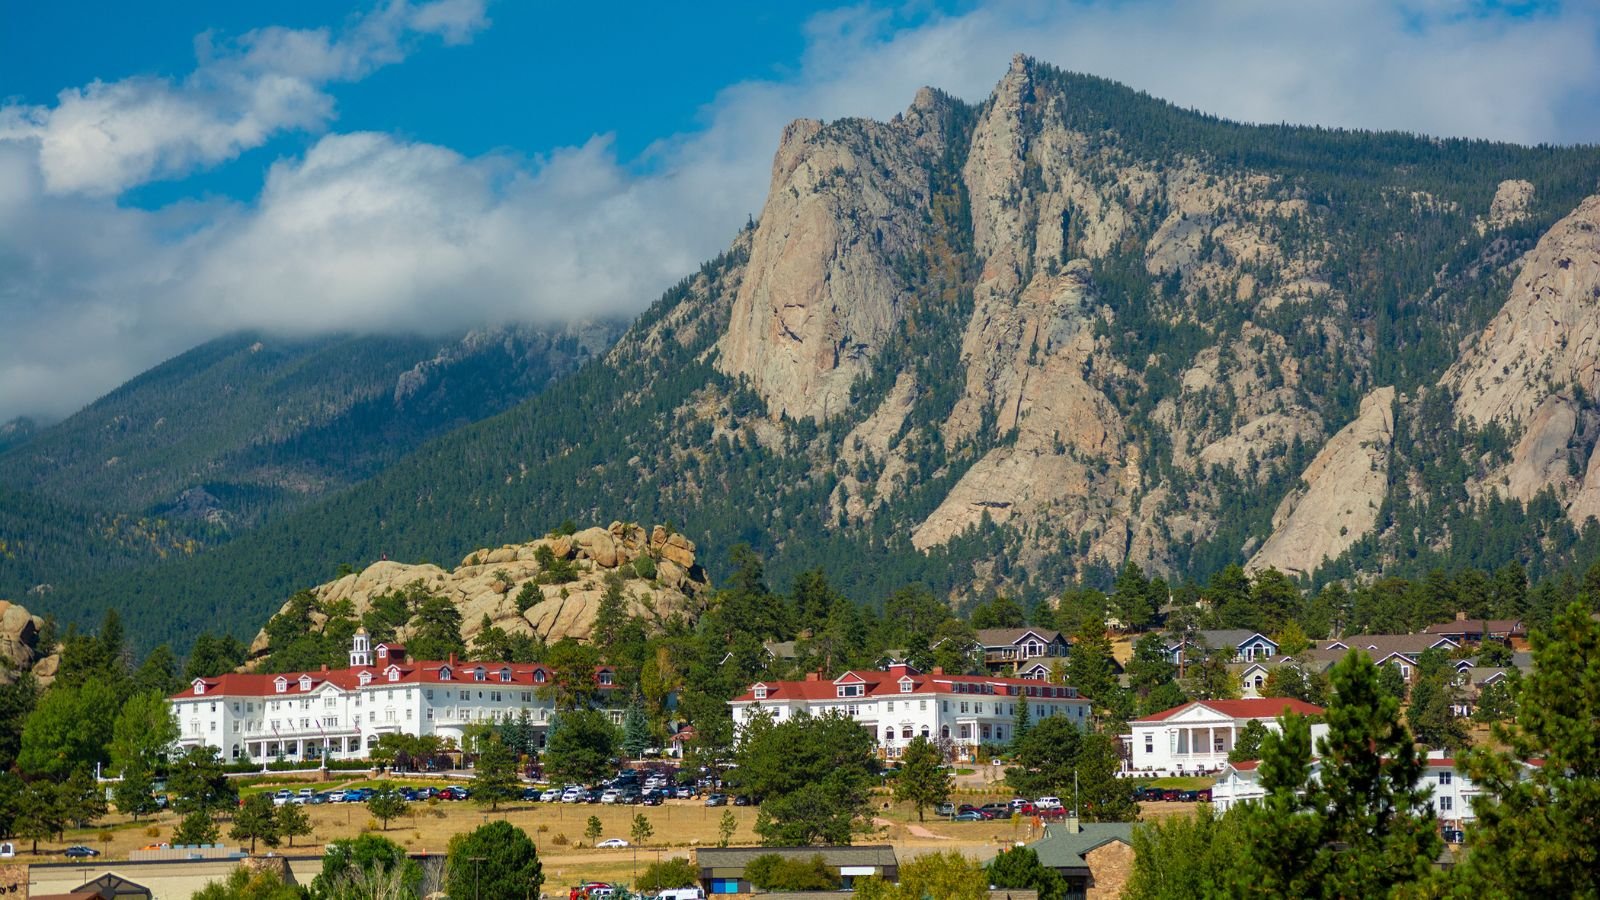 <p>Estes Park is <a href="https://www.tripadvisor.in/Tourism-g60945-Estes_Park_Colorado-Vacations.html" rel="noopener">7,522 feet</a> above sea level in the Colorado Rocky Mountains. You can often see wildlife like elk and bighorn sheep. Estes Park is the starting point for exploring Rocky Mountain National Park. There, you can enjoy hiking, rock climbing, backcountry skiing, and scenic drives. Estes Park itself offers shopping, dining, and attractions like the historic Stanley Hotel. It’s a great place for fishing in mountain lakes, and relaxing in a peaceful environment.</p>